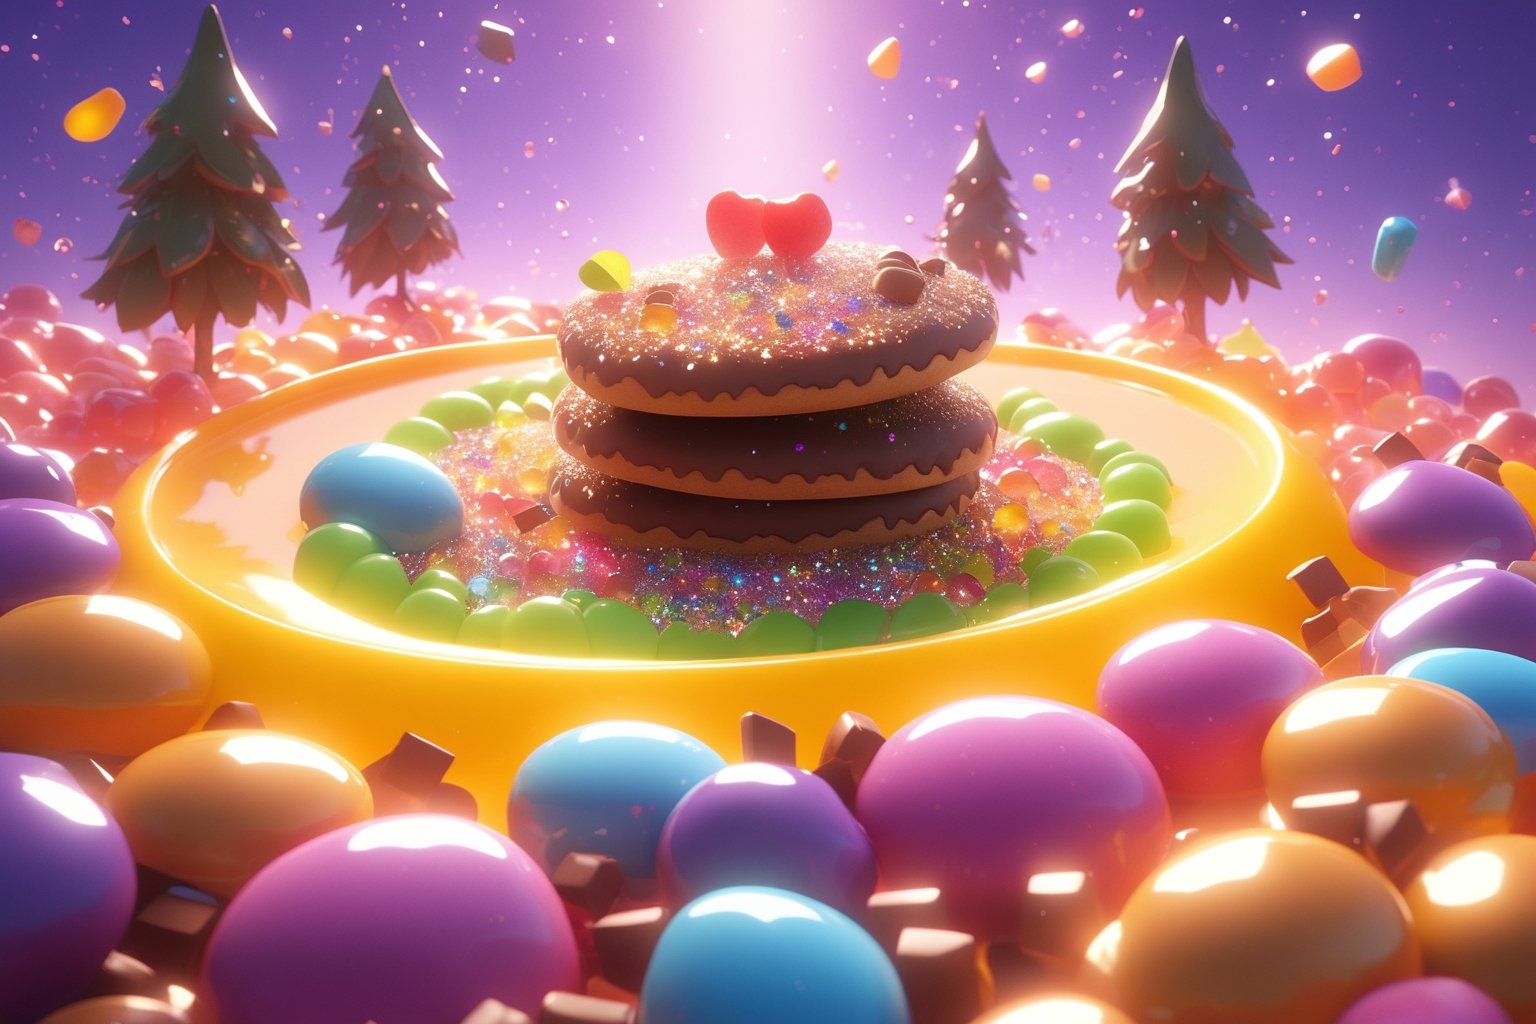 (Masterpiece), (best quality), top quality, fairytale, fantasy, sweet, candy, hyperrealistic, in the style of pixar, 3d, cg unity wallpaper, 8k,  magic, playful, drizzle, syrup, delicious, cookie, cinematic,  shimmer, glitter, scenery, striped, smooth edges, water, gradient, particles, shiny, small details, grass, see-through, transparent, colorful, fruit, chocolate, ,beautiful, sunlight,  volumetric lighting, multicolored theme,  (gradients), atmospheric, top lighting, muted colors, soothing tones, intricate details, dynamic, animated,  breathtaking, magical, tree, (deep depth of field:1.1), extremely detailed background, 850mm, digital illustration, more detail XL, glitter,sweetscape,full background,glitter,shiny